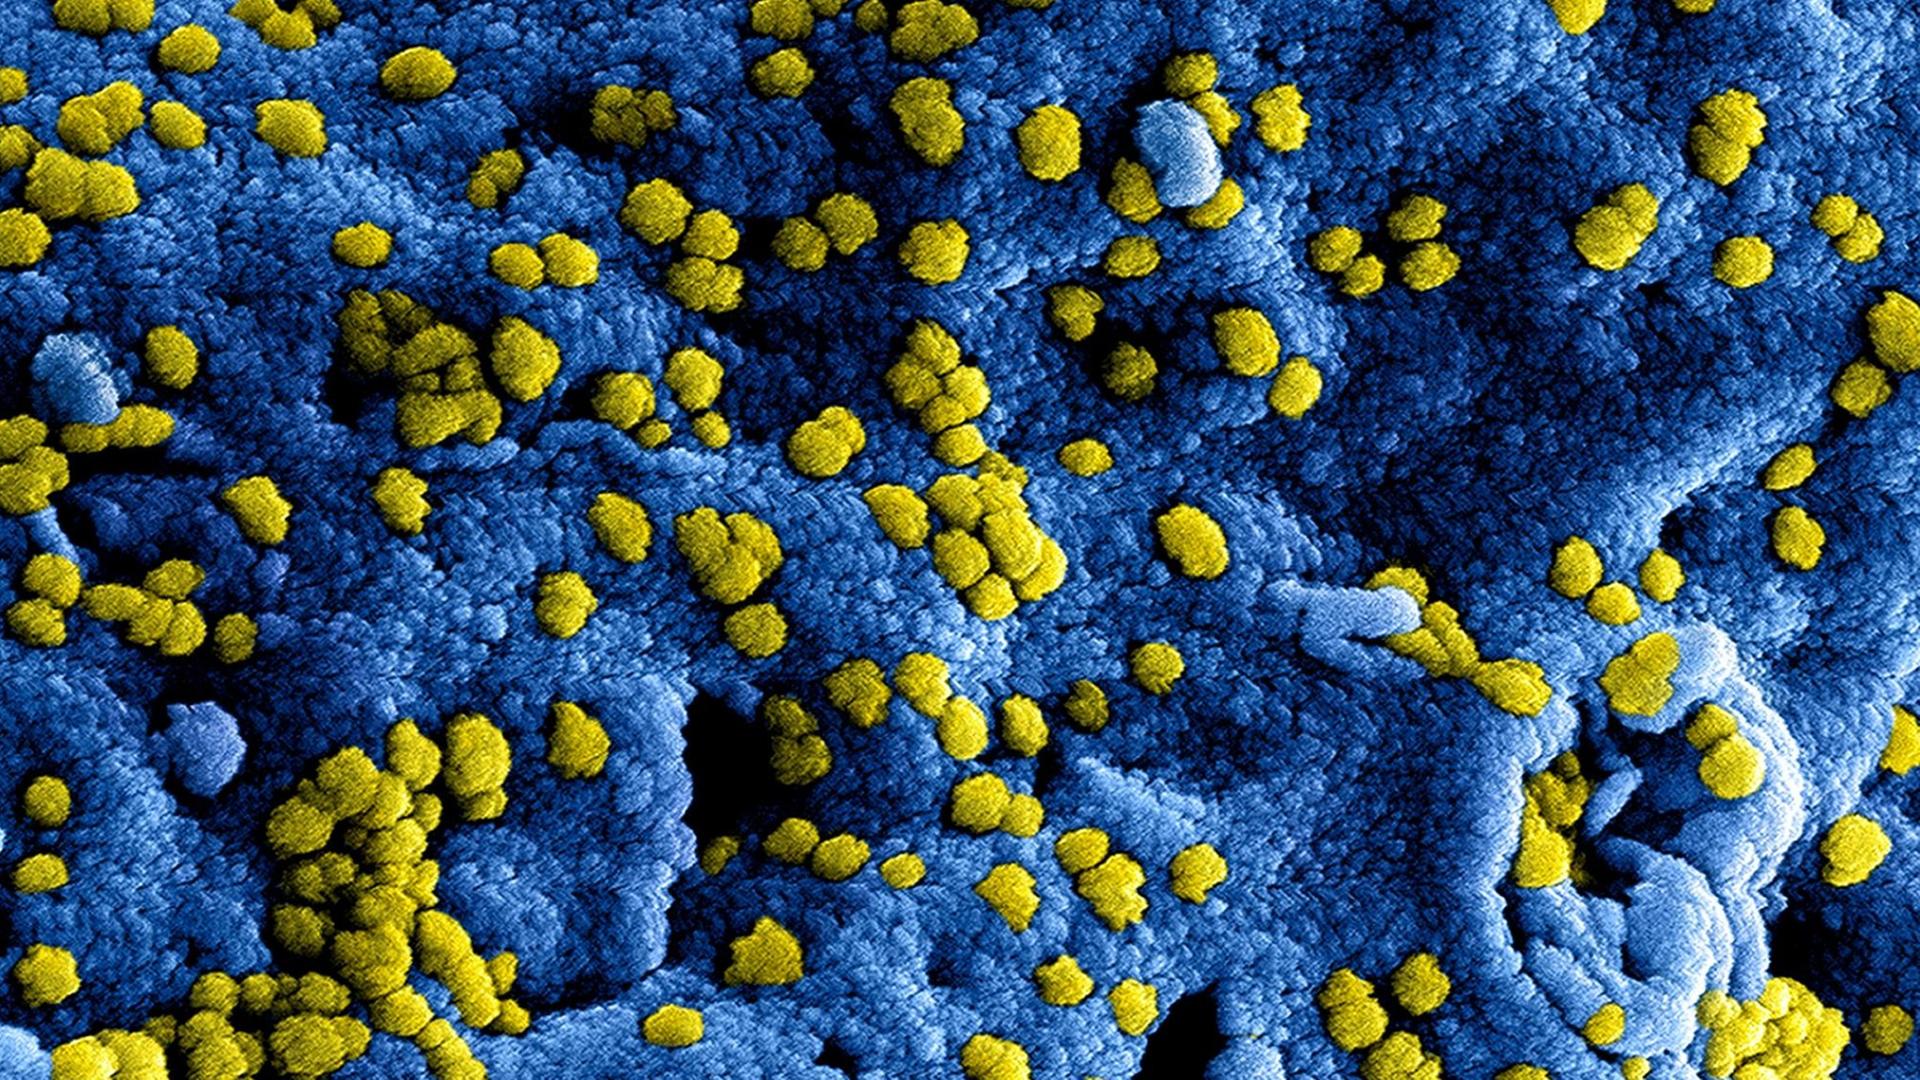 HANDOUT - Produced by the National Institute of Allergy and Infectious Diseases (NIAID), this highly-magnified, digitally-colorized scanning electron micrograph (SEM) reveals ultrastructural details at the site of interaction of numerous yellow-colored Middle East respiratory syndrome Coronavirus (MERS-CoV) viral particles that were on the surface of a Vero E6 cell, which had been colorized blue. MERS-CoV was identified in 2012 as the cause of respiratory illness in people. Investigations are being done to figure out the source of MERS-CoV and how it spreads. So far, there are no reports of anyone in the U.S. getting infected with MERS-CoV. Most people who got infected with MERS-CoV developed severe acute respiratory illness with symptoms of fever, cough, and shortness of breath. About half of them died. Some people were reported as having a mild respiratory illness. MERS-CoV has been shown to spread between people who are in close contact. Transmission from infected patients to healthcare personnel has also been observed. Clusters of cases in Saudi Arabia, Jordan, the UK, France, Tunisia, and Italy are being investigated. Photo: National Institute of Allergy and Infectious Diseases (NIAID) 2014/dpa (ACHTUNG: Nur zur redaktionellen Verwendung im Zusammenhang mit der aktuellen Berichterstattung und nur bei Nennung: "Foto: National Institute of Allergy and Infectious Diseases (NIAID) 2014/dpa"; zu: "Mann aus Region Osnabrück mit tödlichem Mers-Virus infiziert" vom